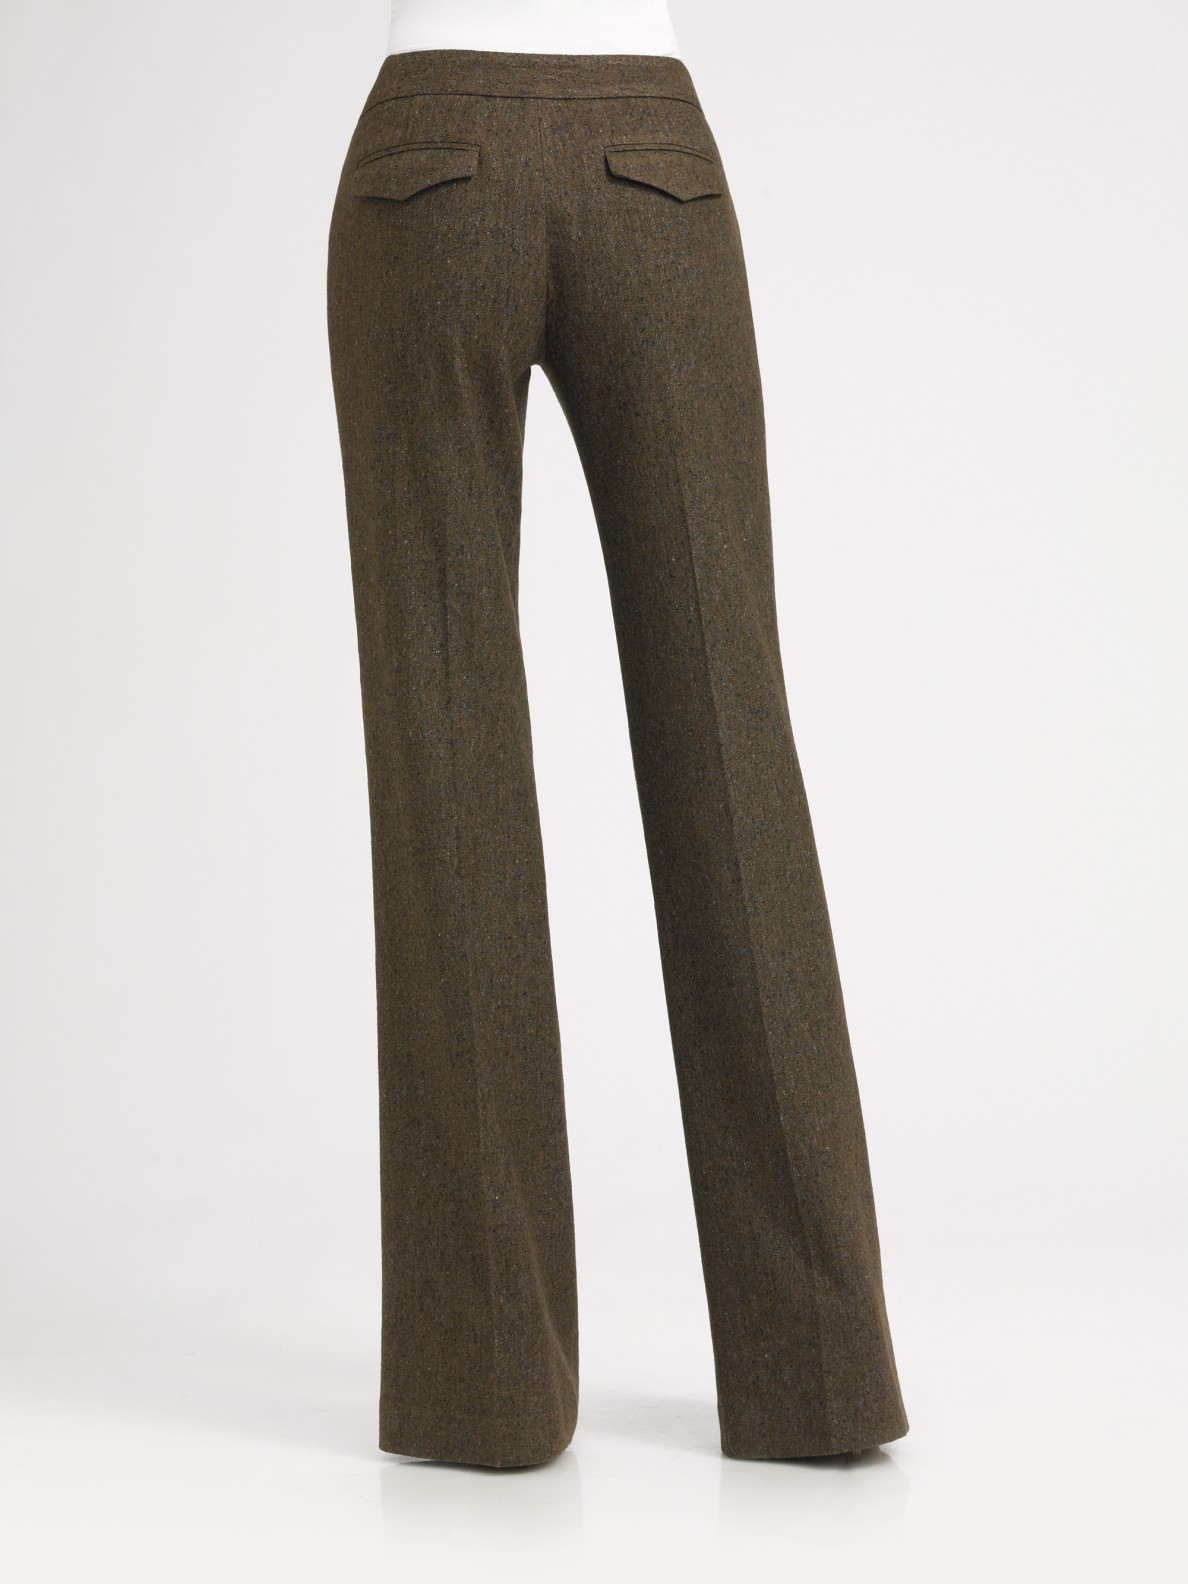 Lyst - Theory Tensley Donegal Tweed Pants in Green